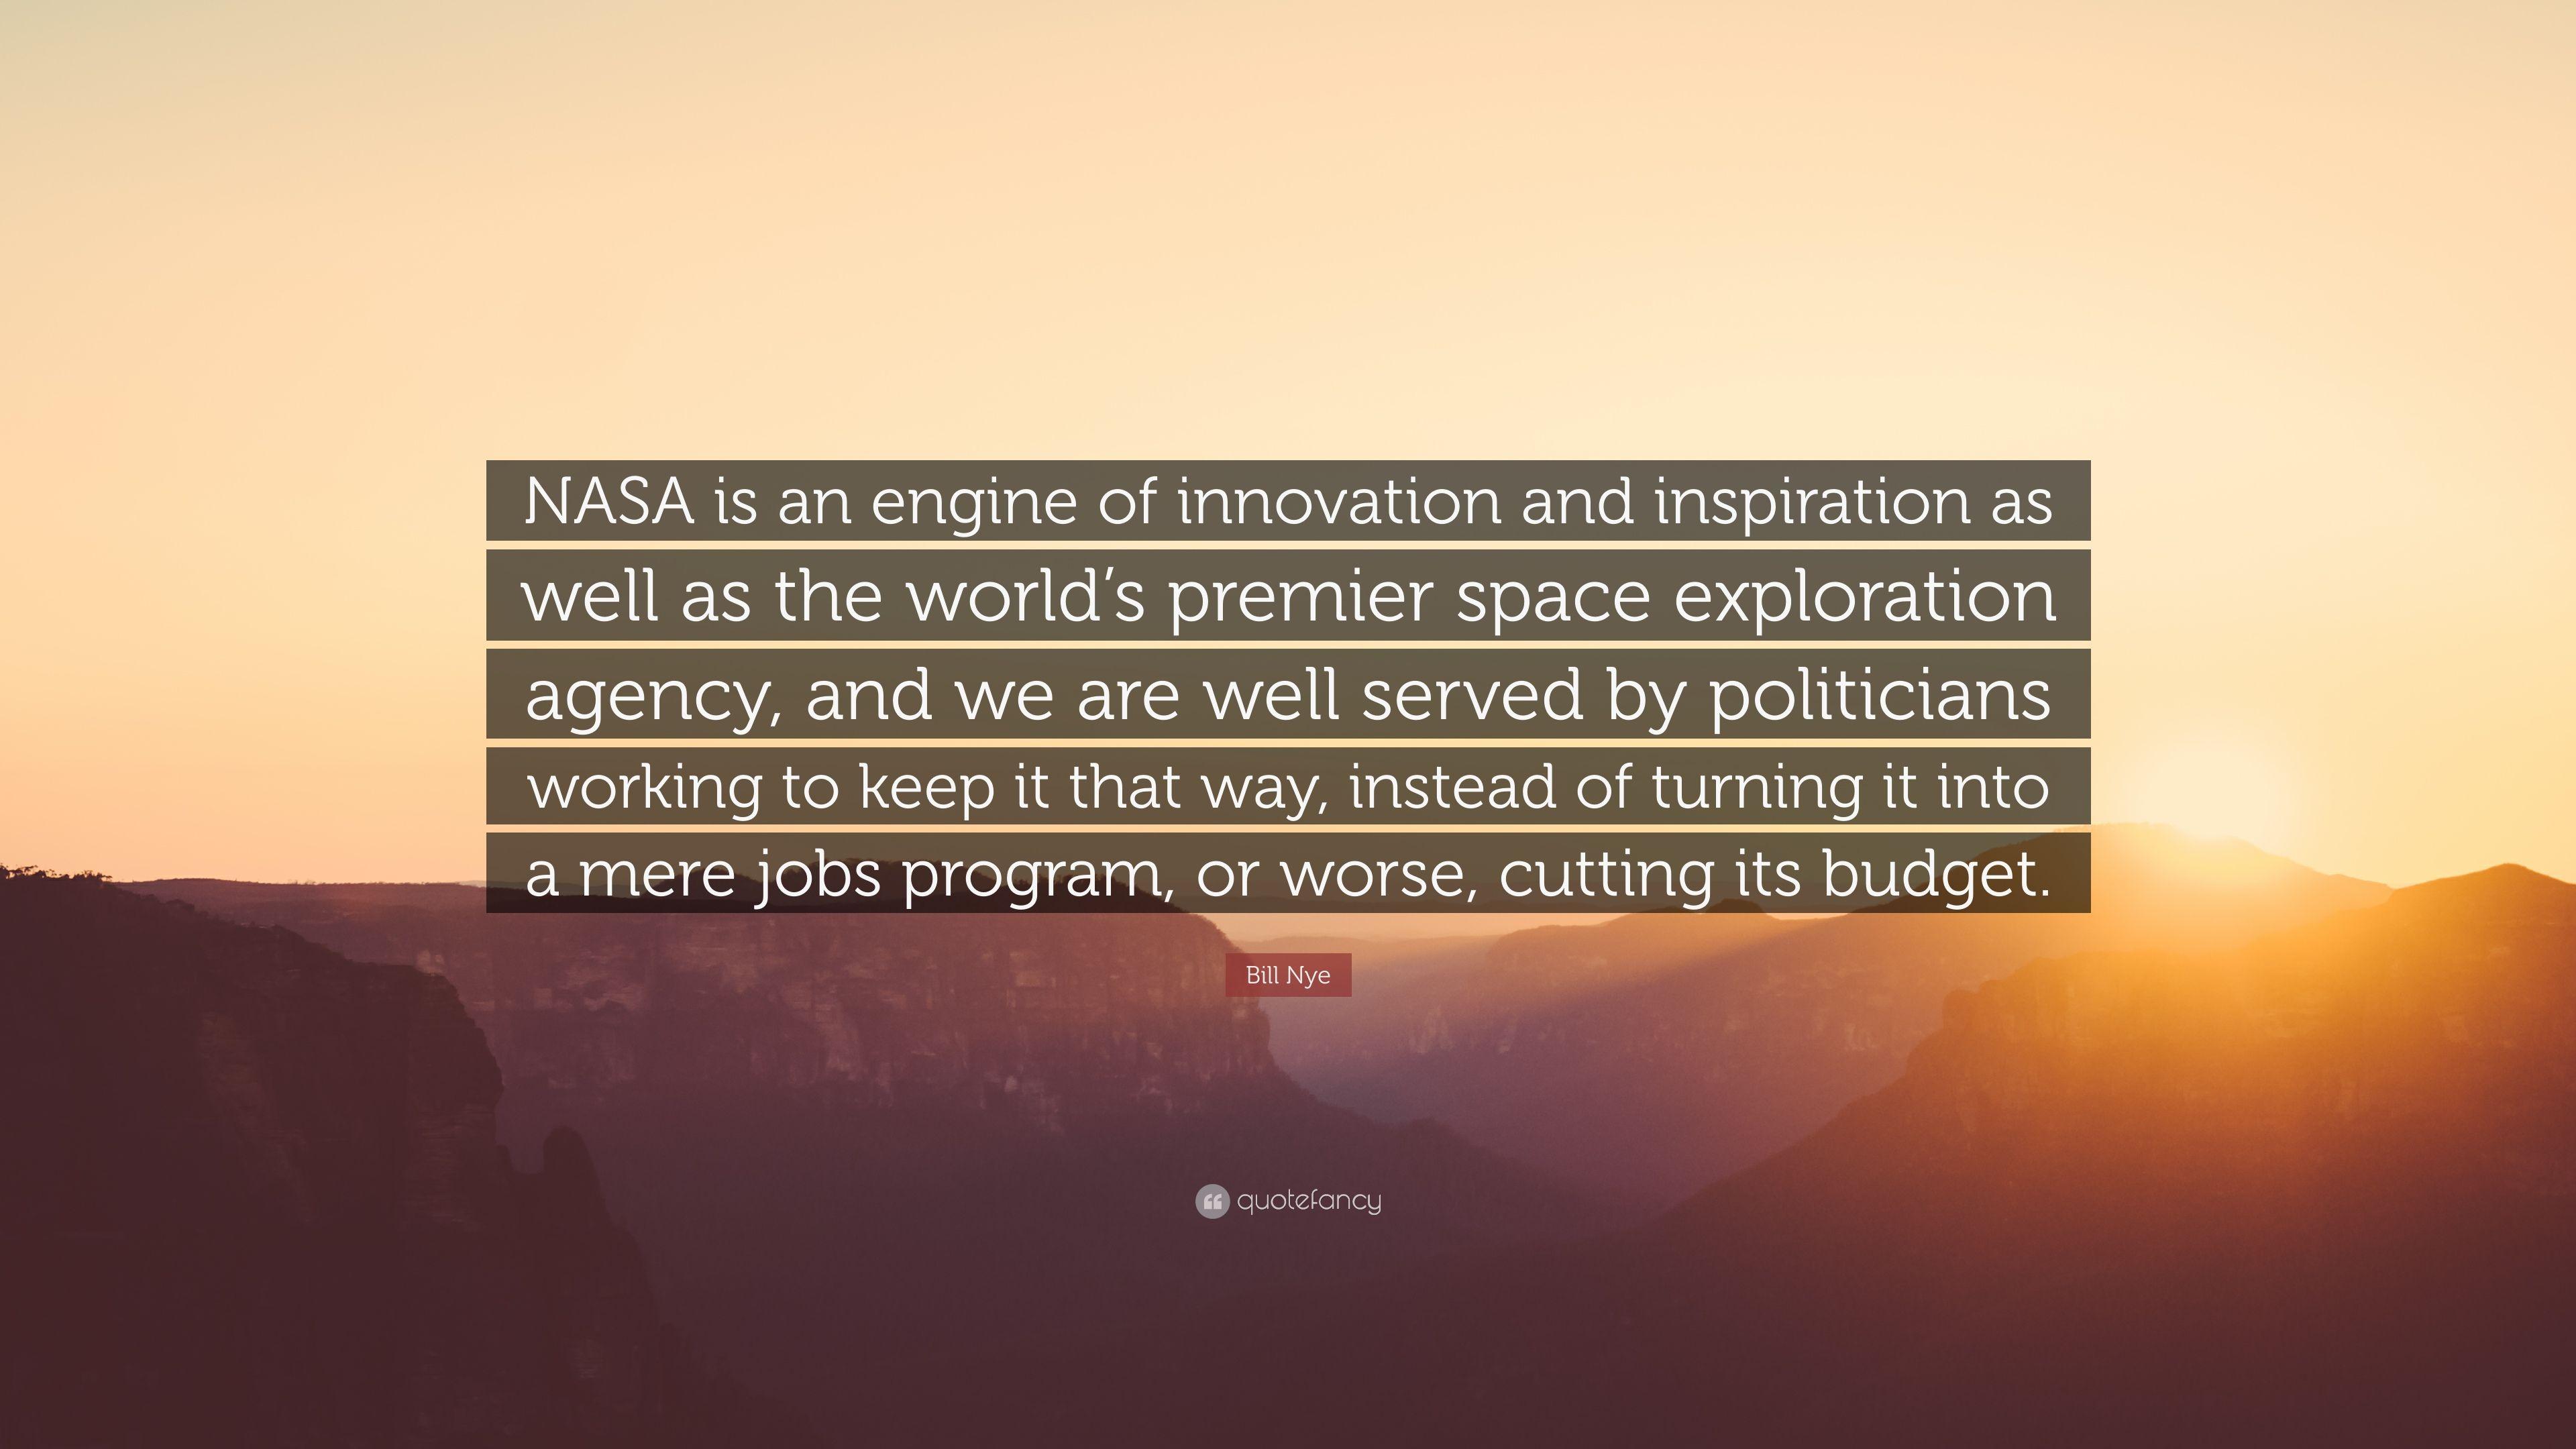 Bill Nye Quote: “NASA is an engine of innovation and inspiration